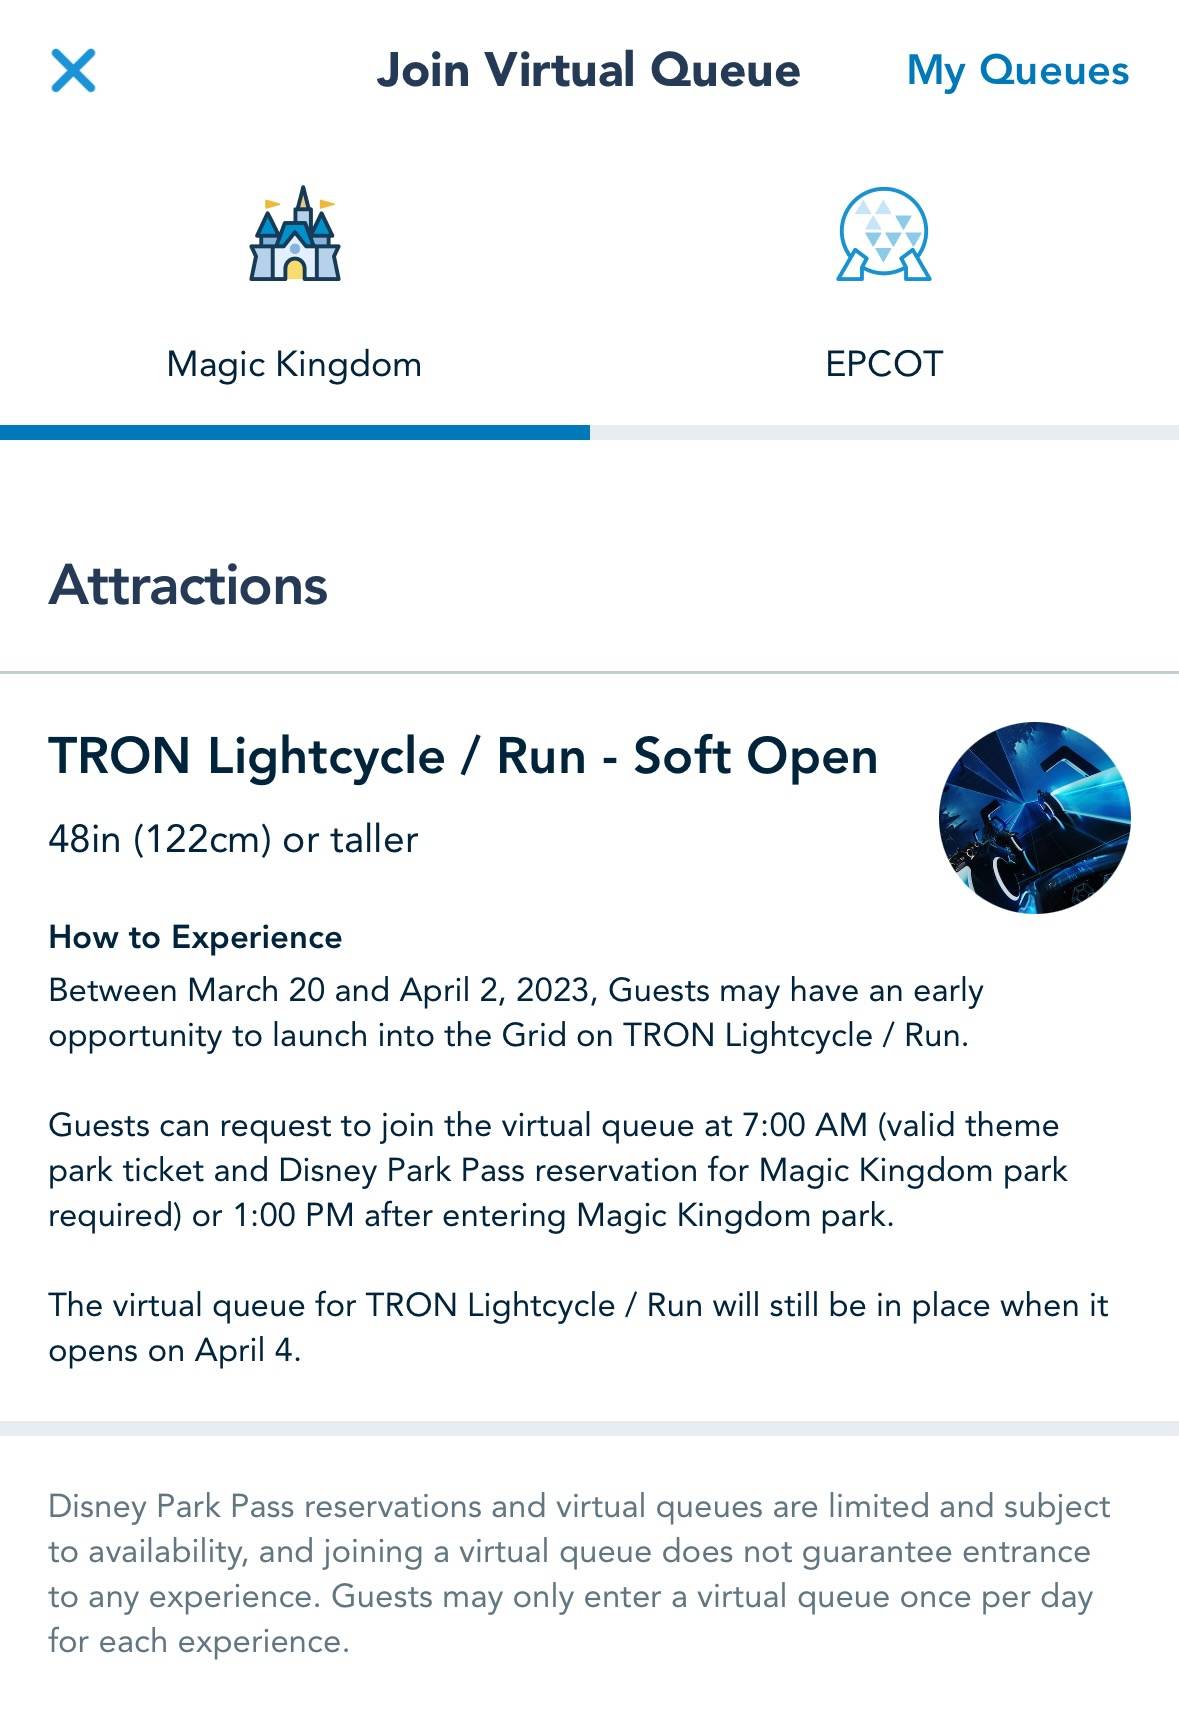 TRON Lightcycle Run Virtual Queue added to My Disney Experience for the soft open beginning March 20